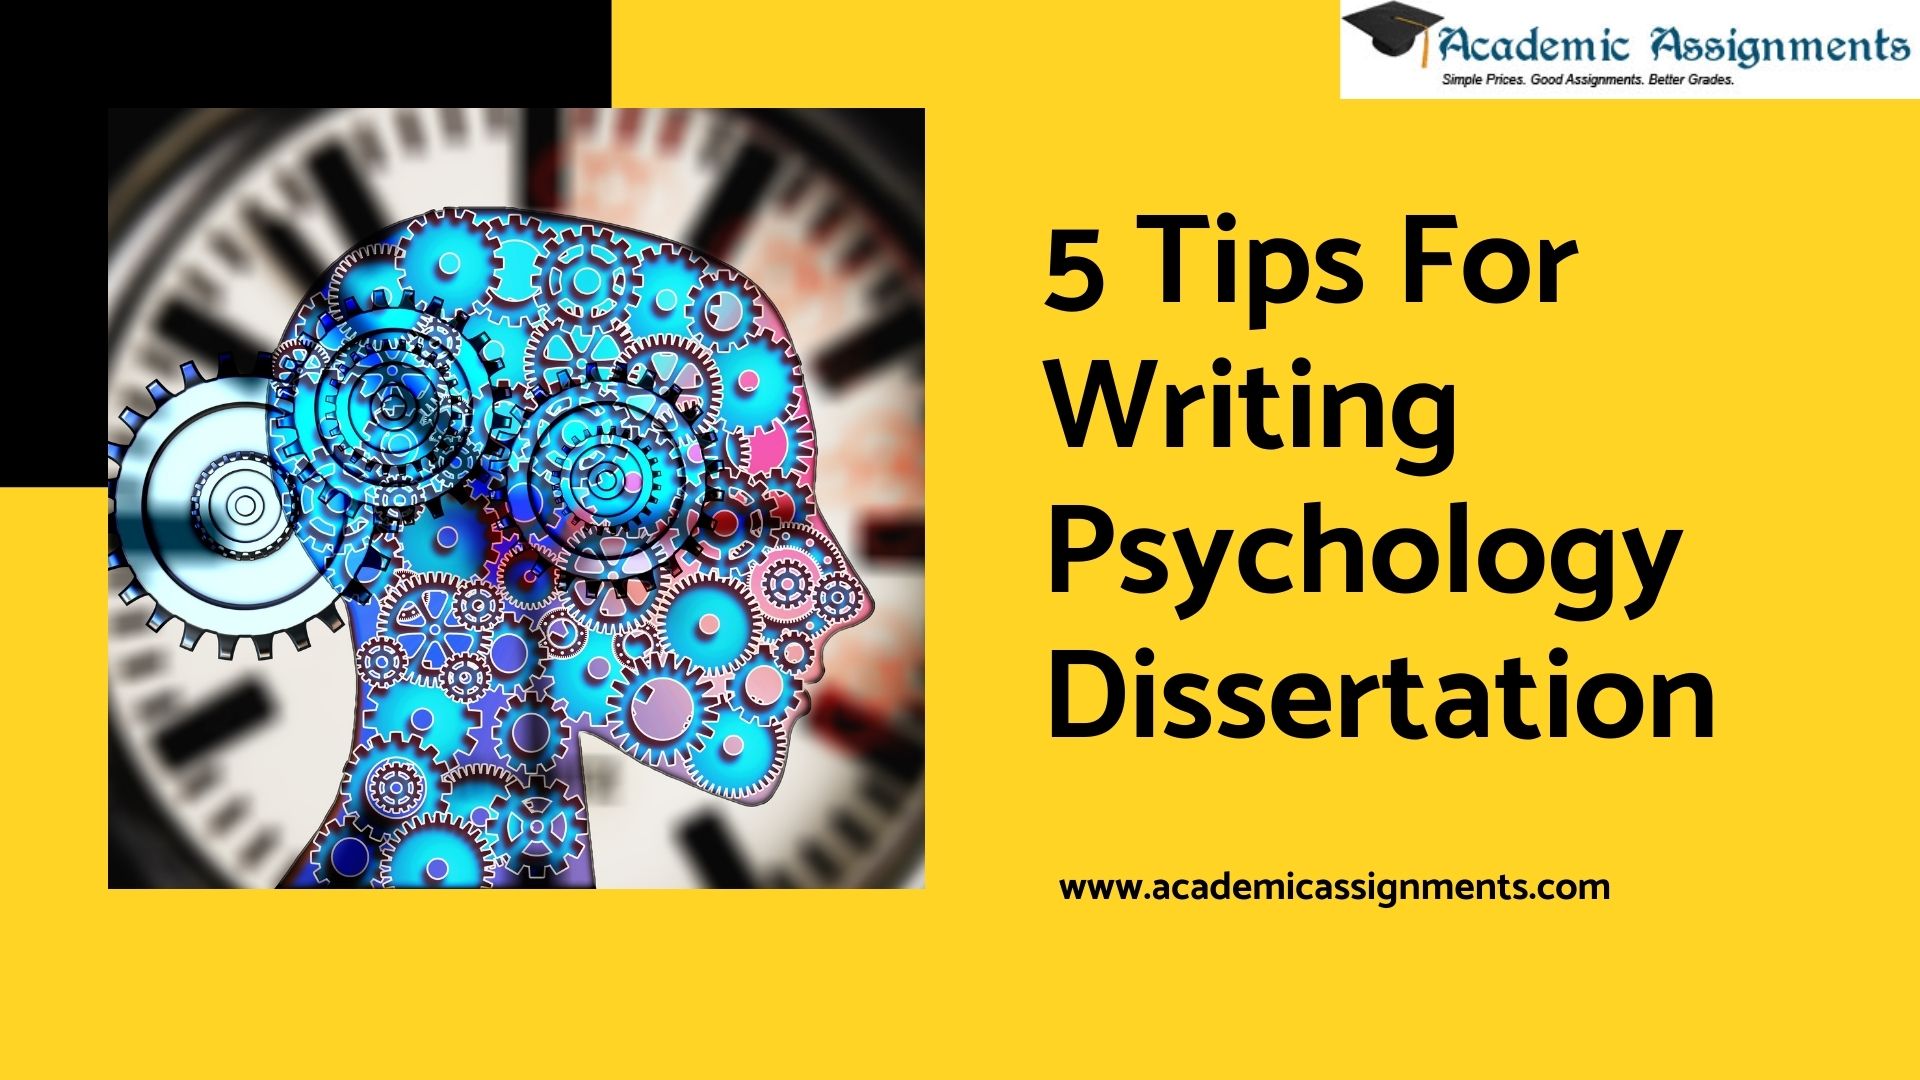 5 Tips For Writing Psychology Dissertation